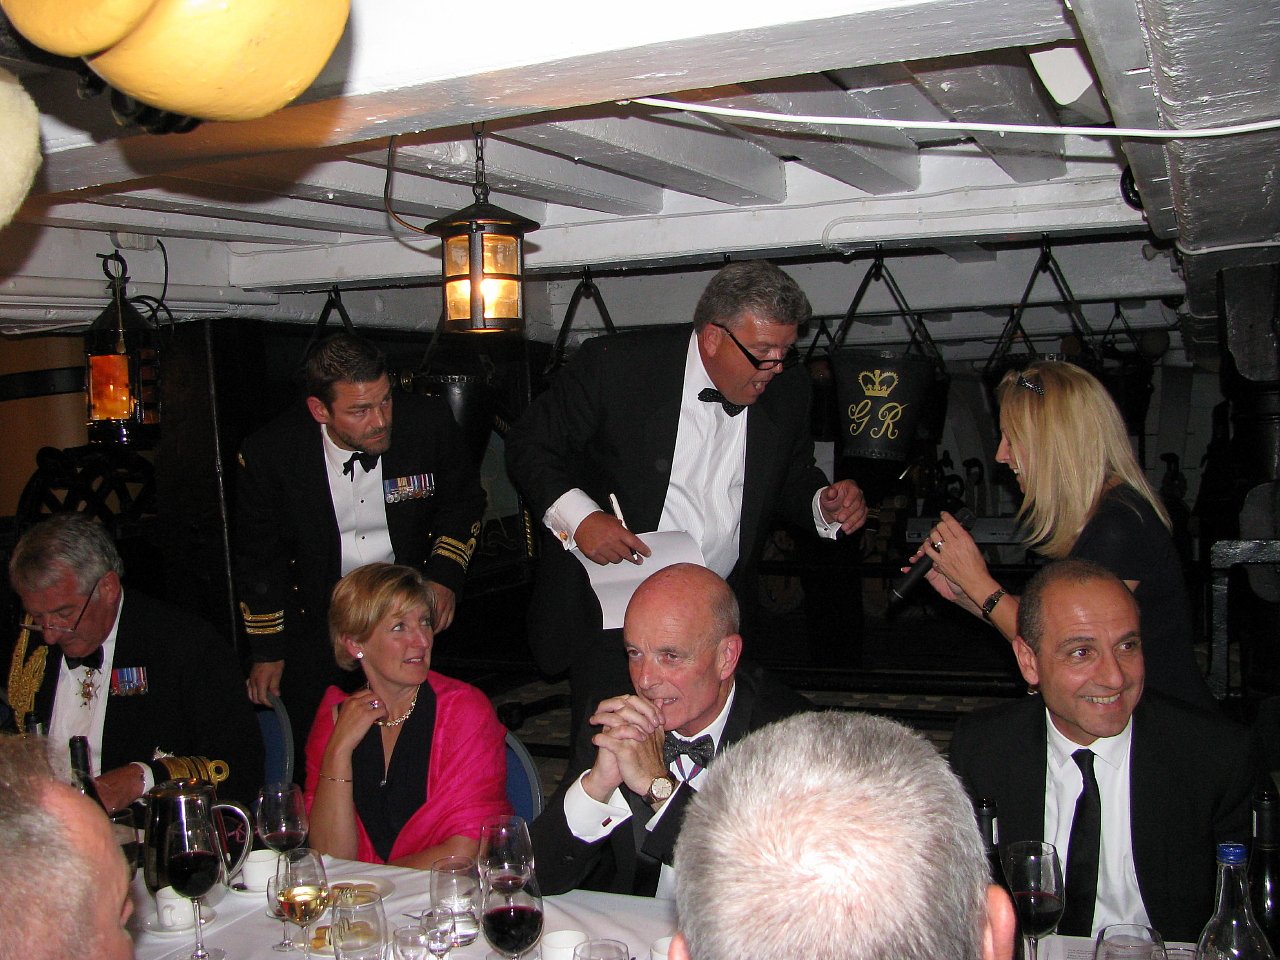 Project+Vernon+charity+dinner+on+board+HMS+Victory+11+Sep+2014+(92).jpg